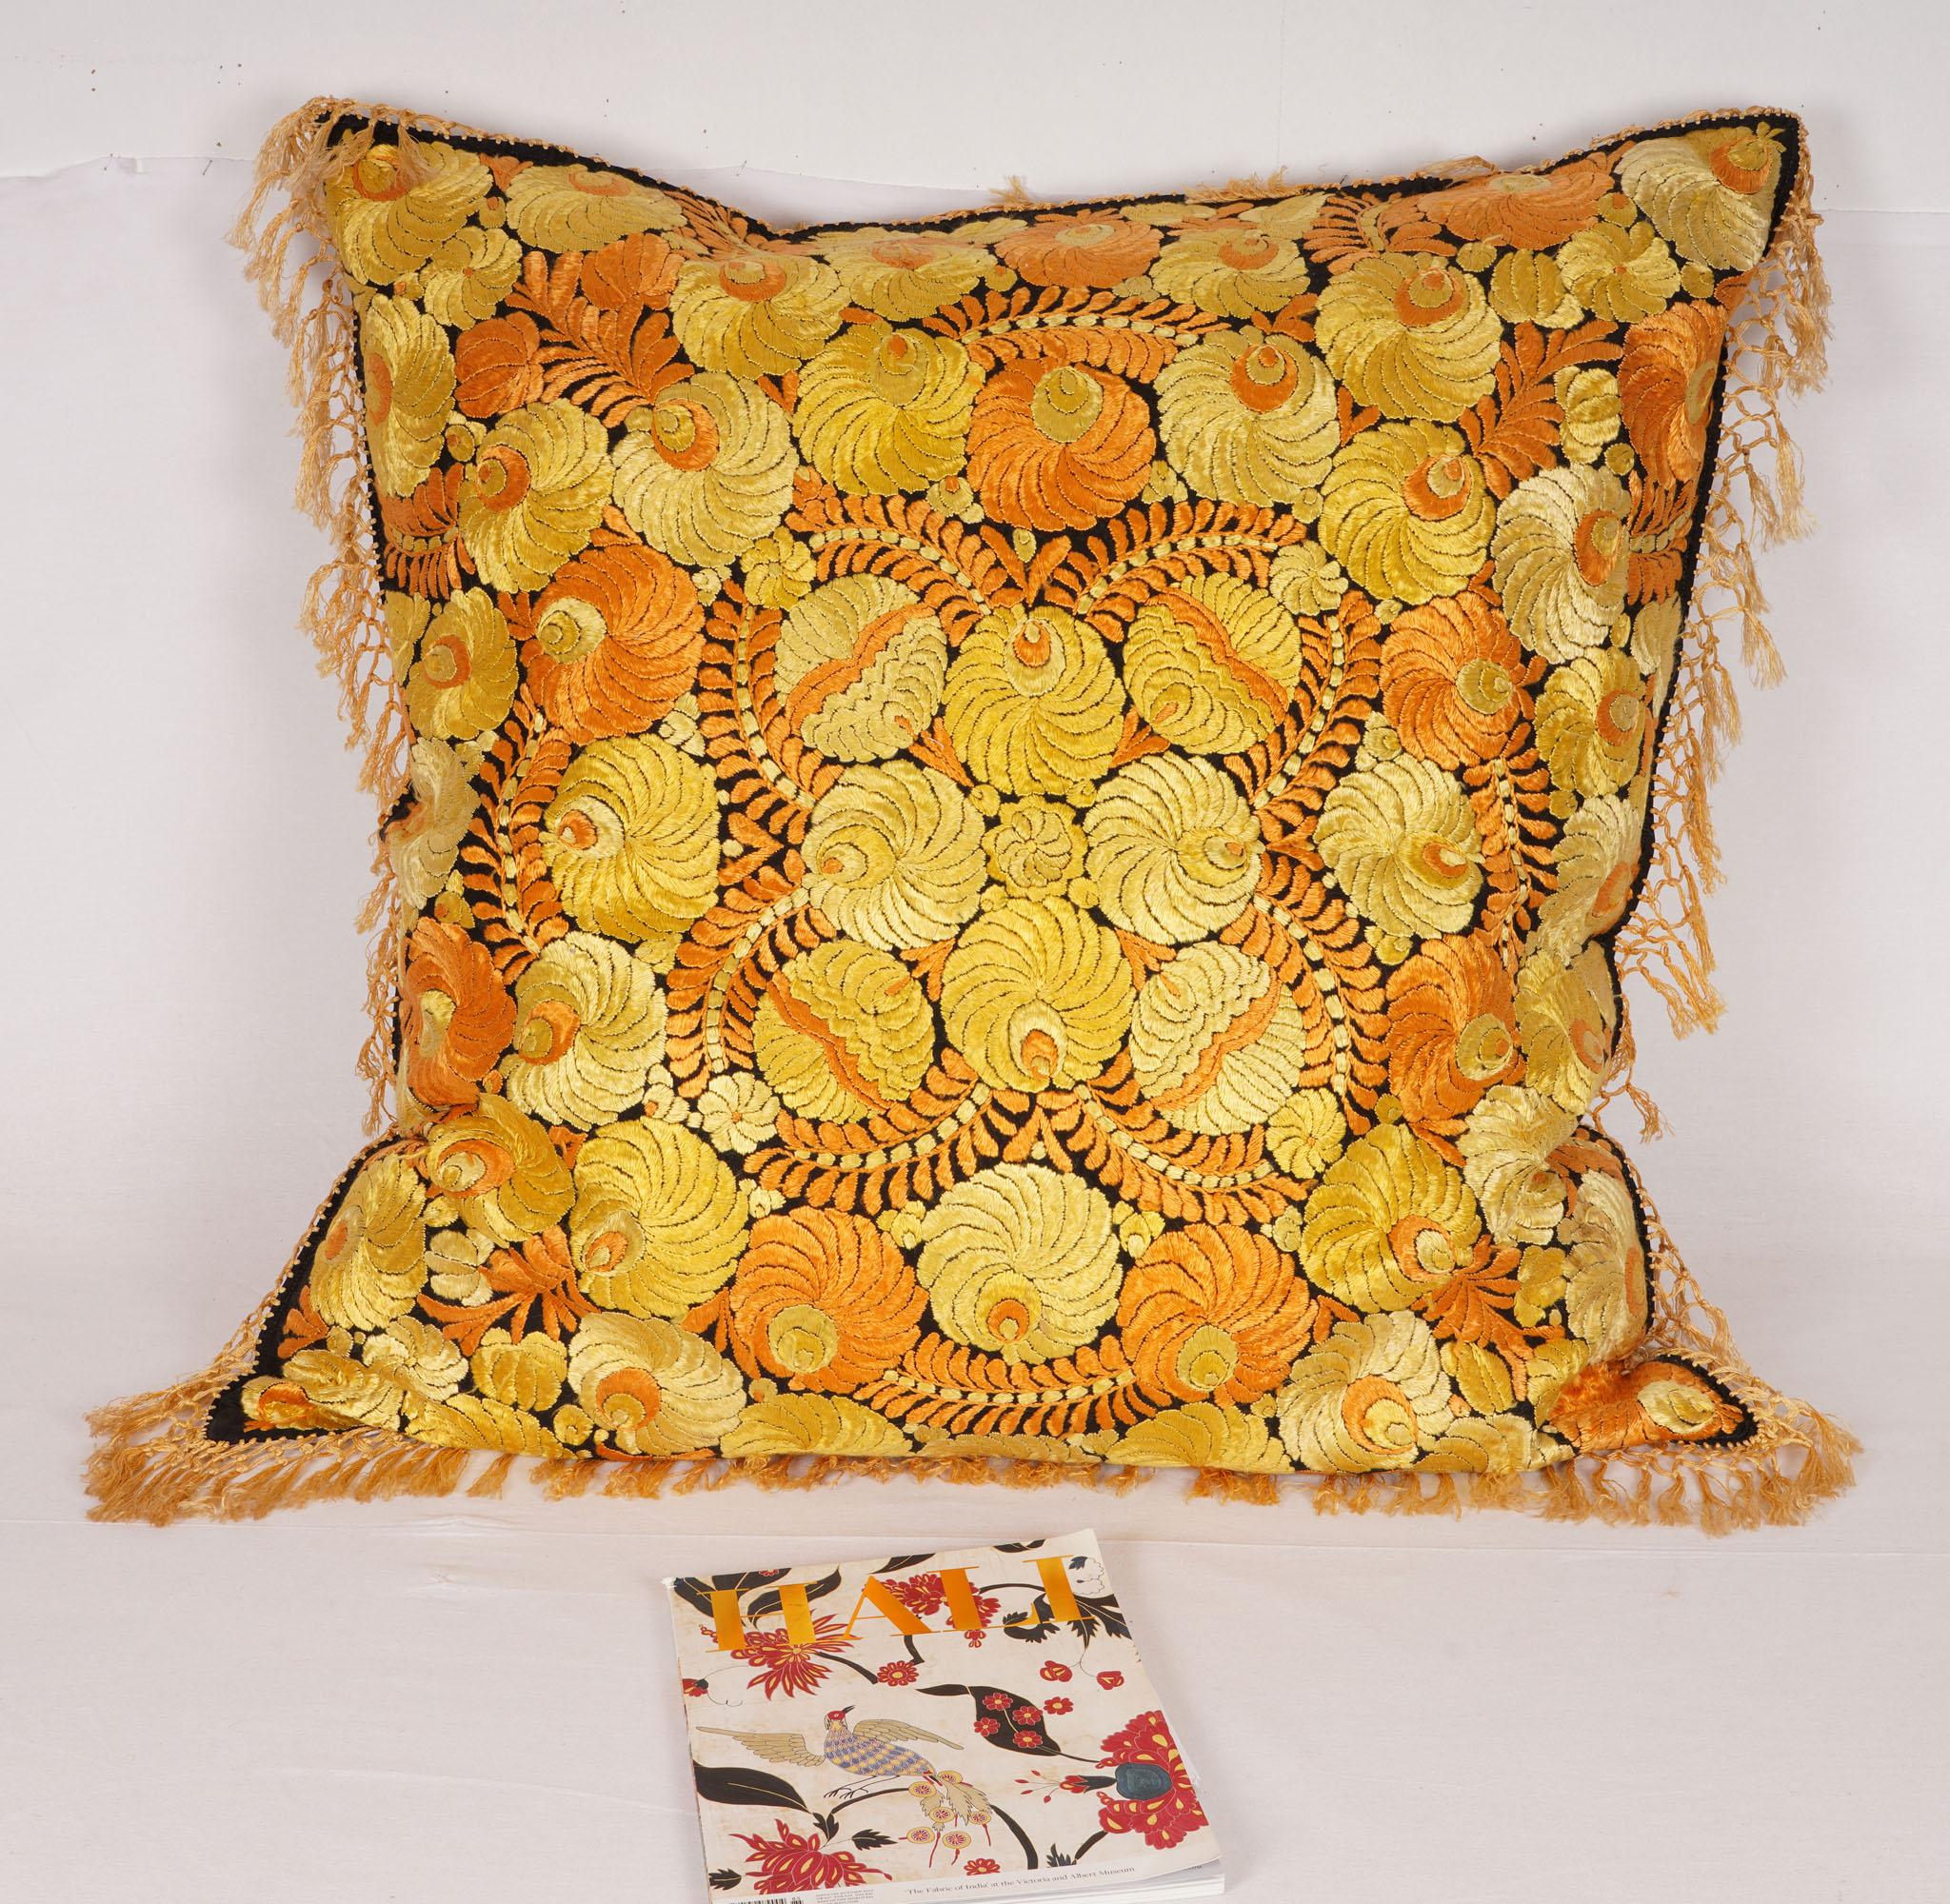 Folk Art Floor Cushion, Pillowcase Made from a Matyo Embroidery, Hungary, Early 20th C For Sale